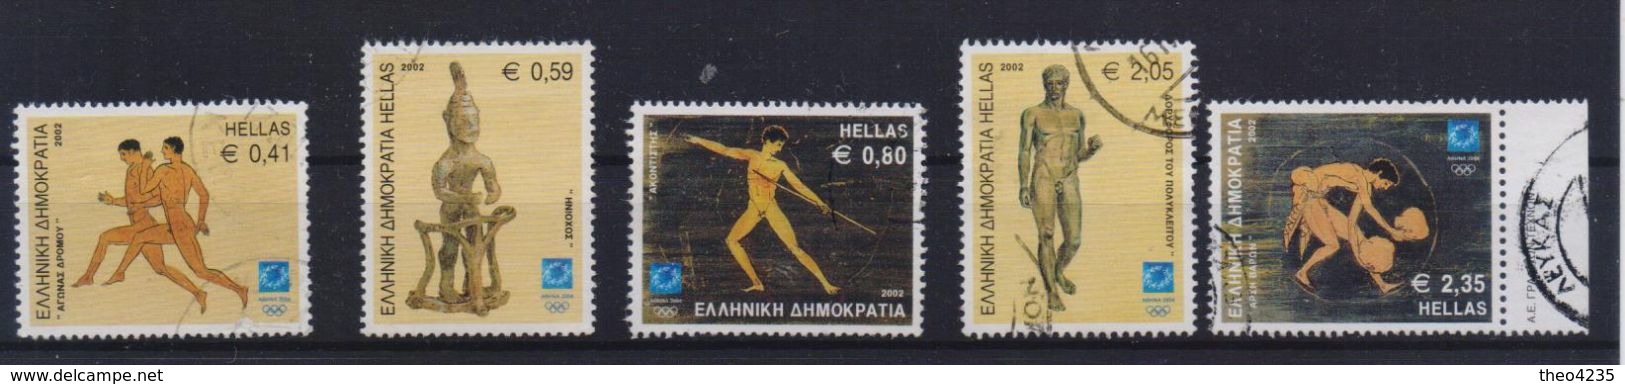 GREECE STAMPS 2002/ ATHENS 2004:THE ANCIENT GAMES-15/3/02-USED-COMPLE TE SET(100) - Oblitérés